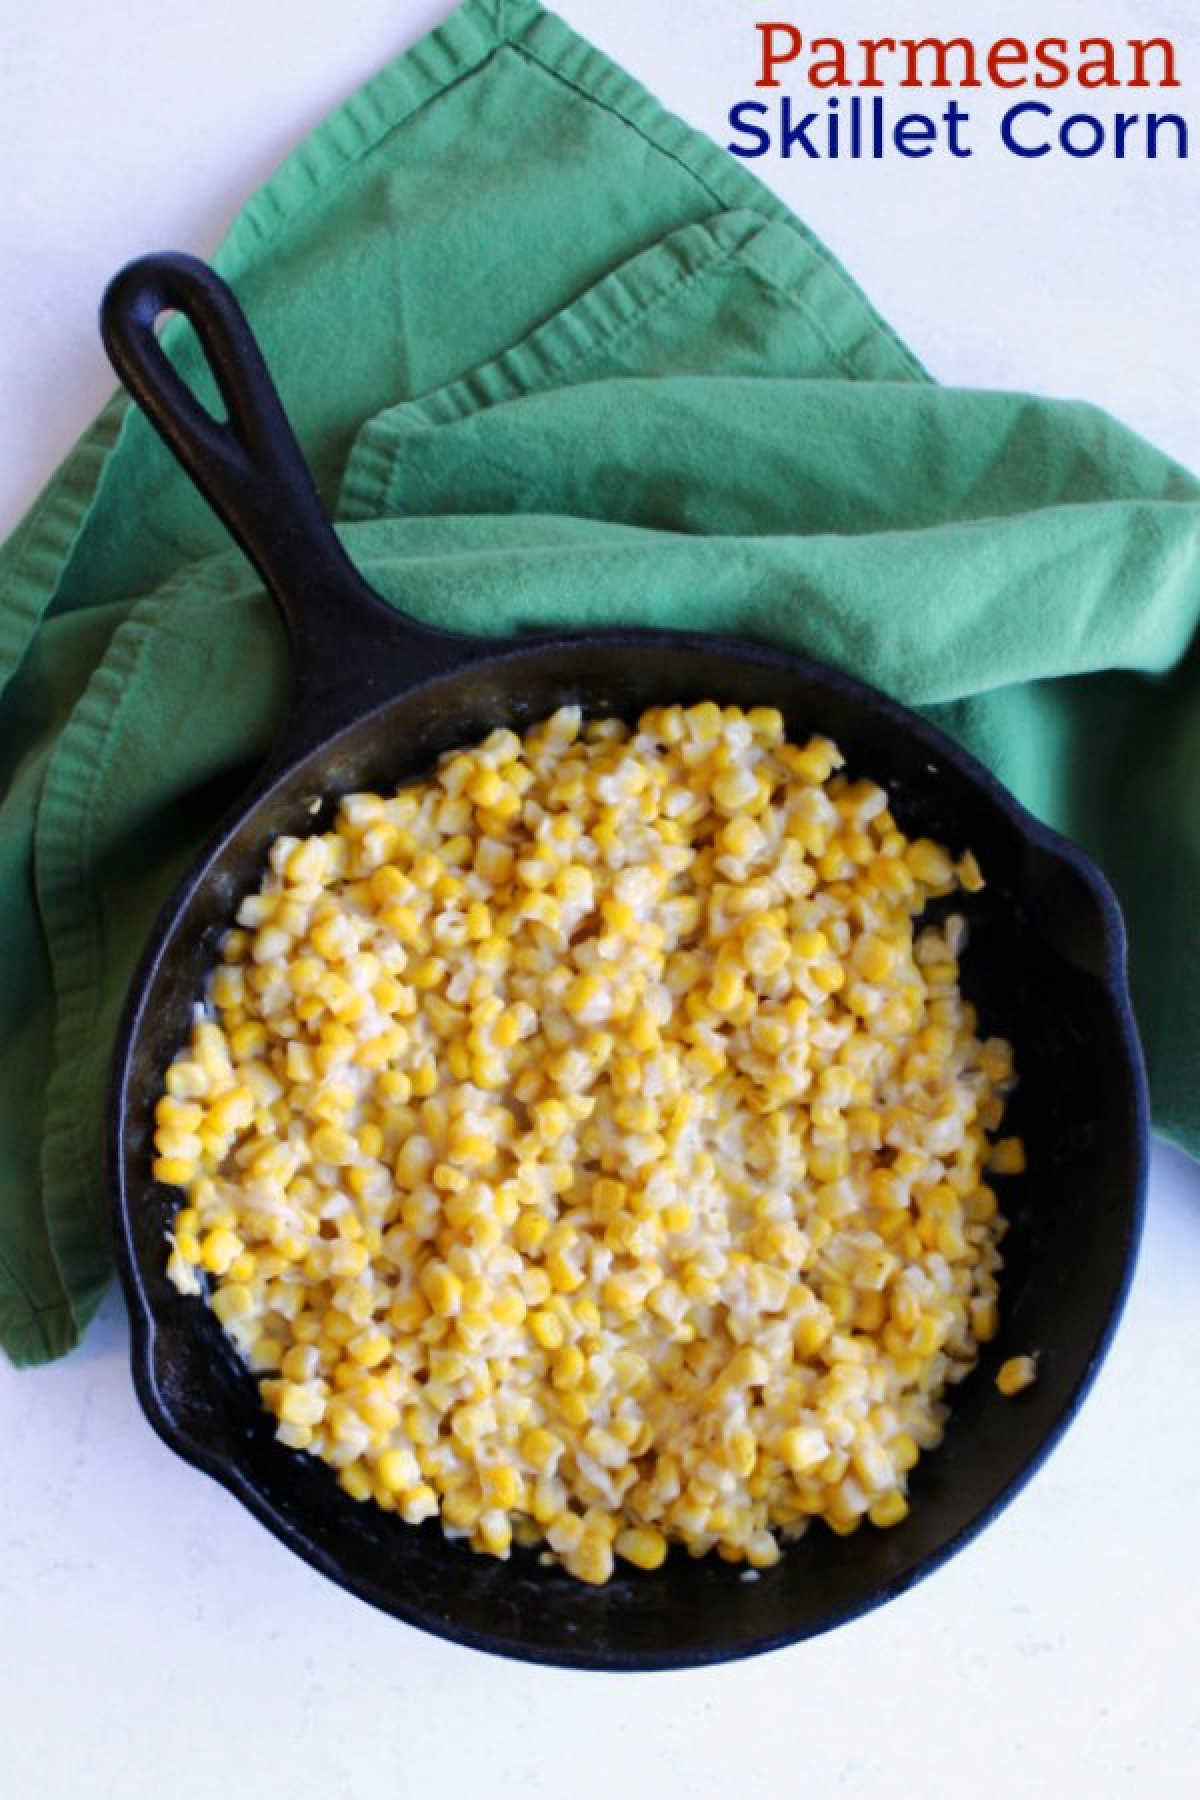 This creamy savory corn side dish is quick and easy to make and it goes with just about anything. Make it a regular addition to your dinner menu.